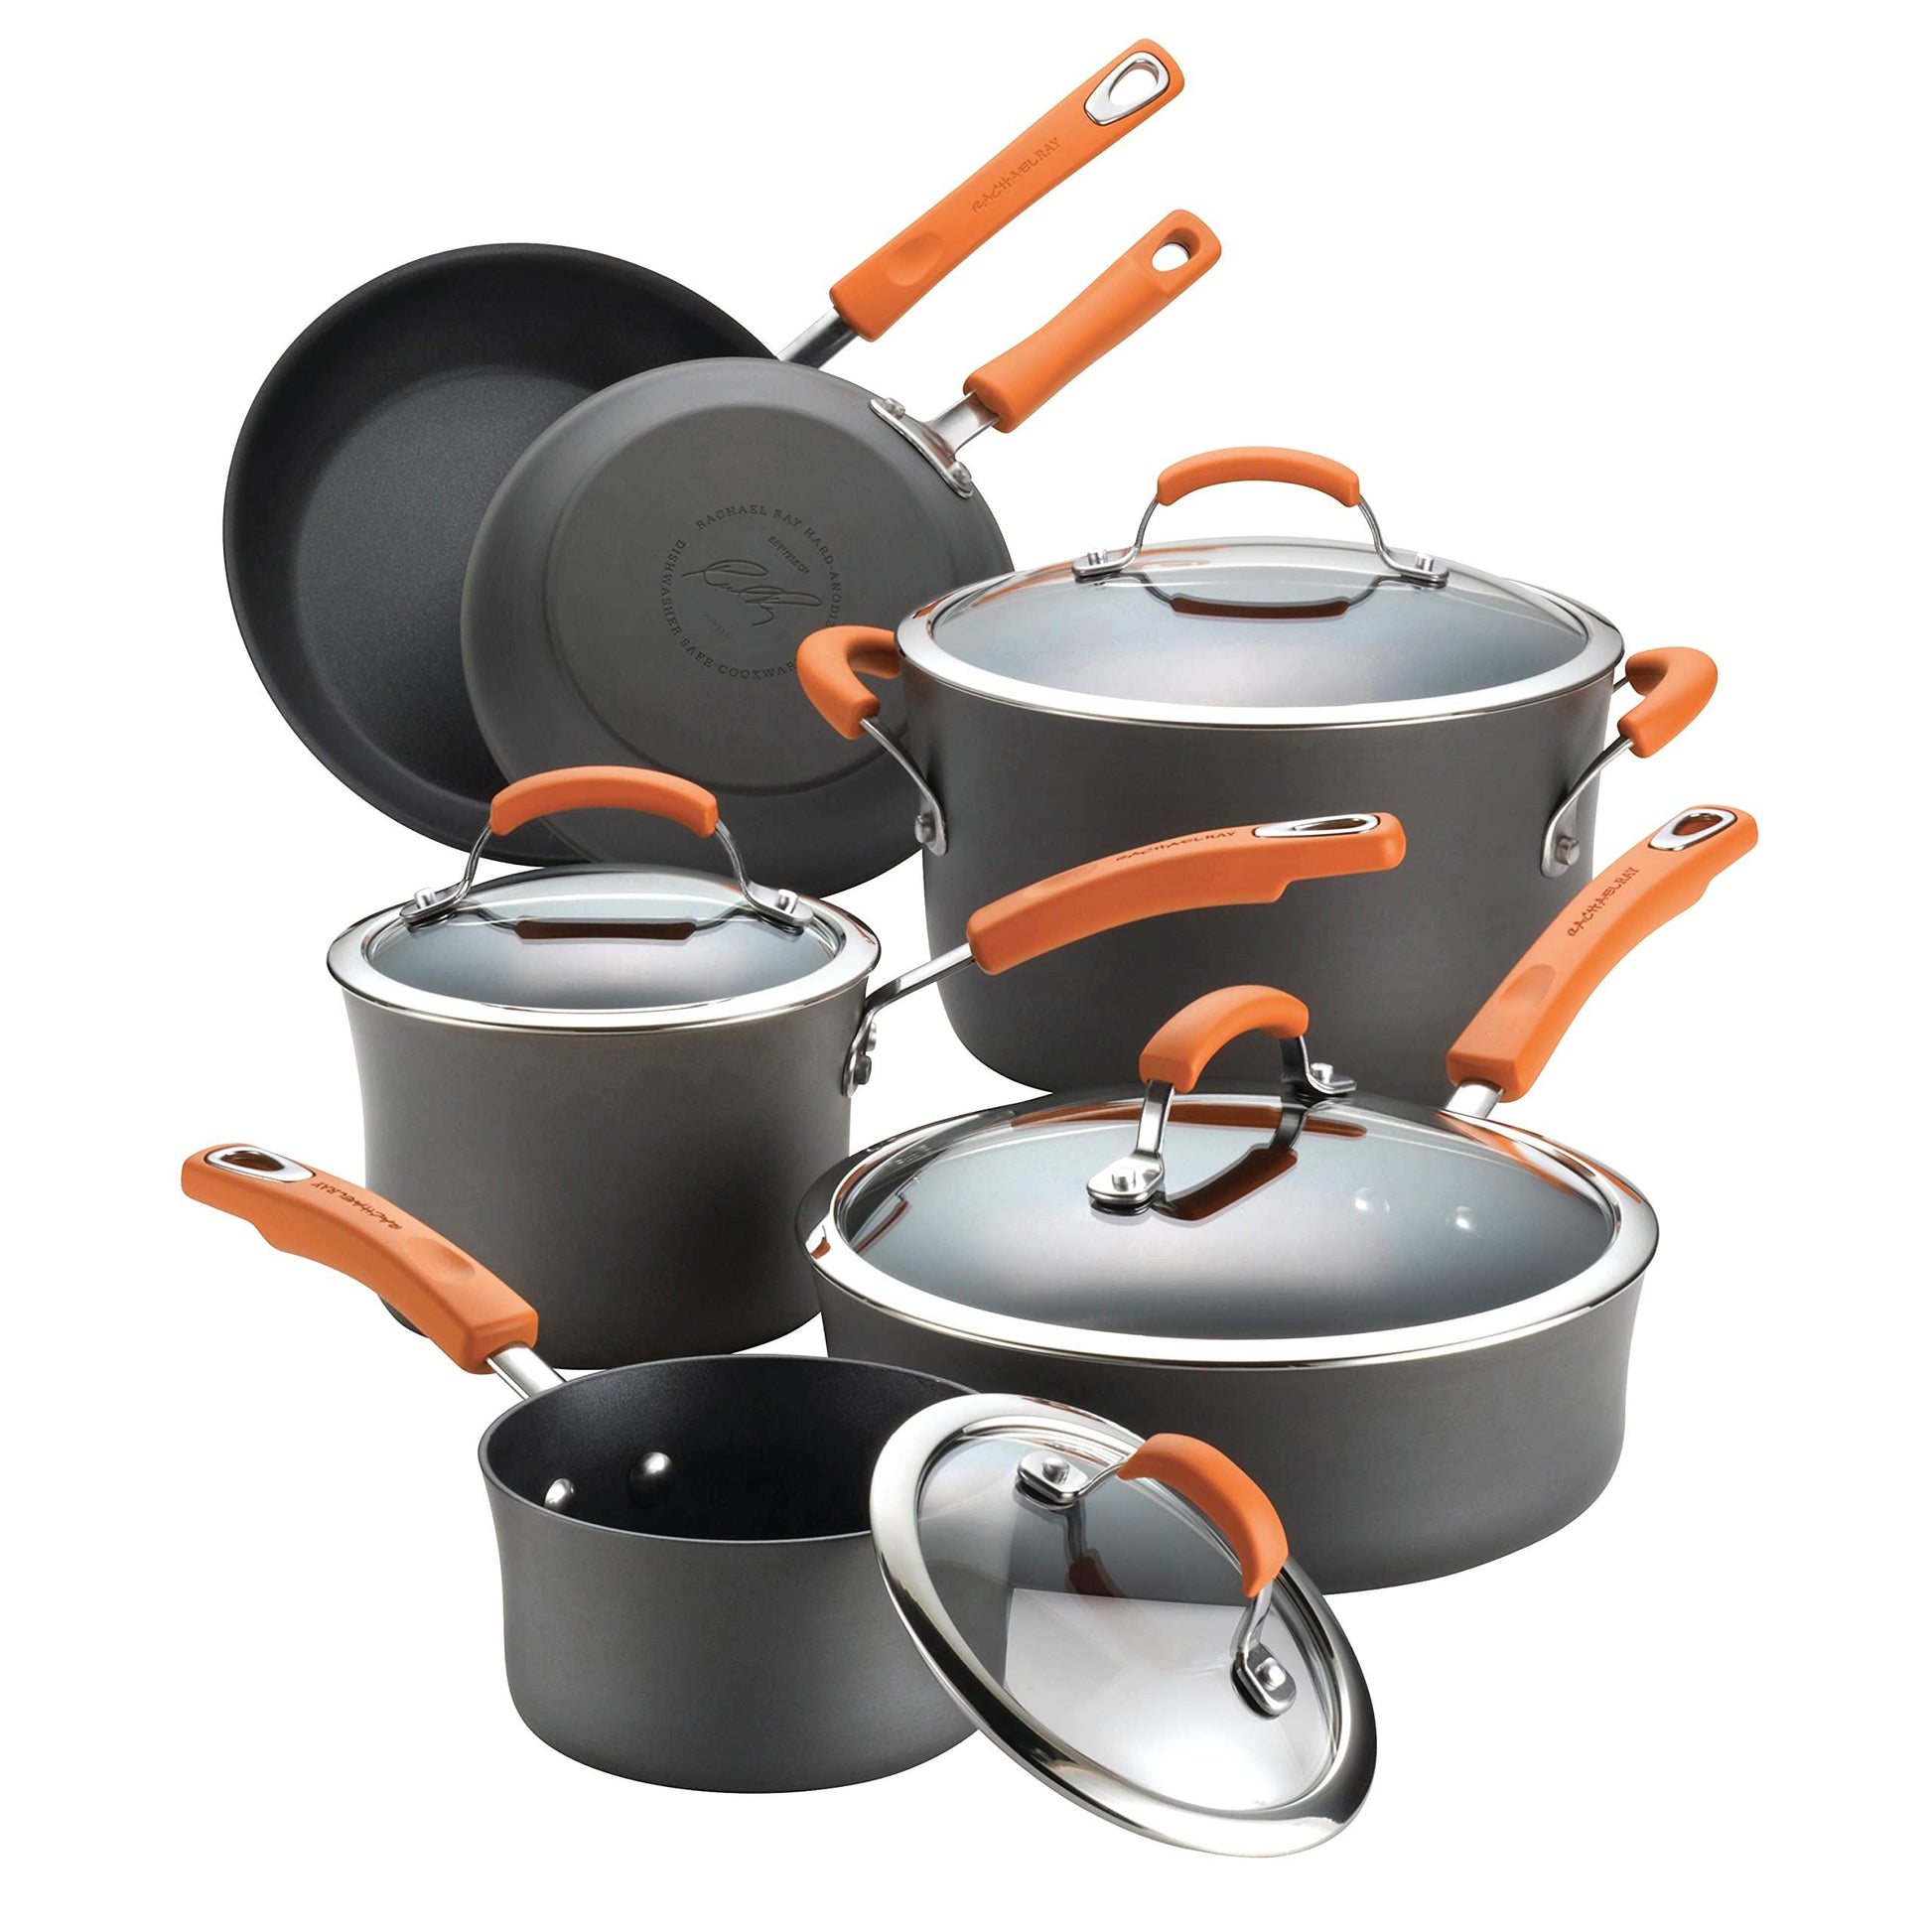 Rachael Ray Brights Hard-Anodized Aluminum Nonstick Cookware Set with Glass Lids, 10-Piece Pot and Pan Set, Gray with Orange Handles - CookCave